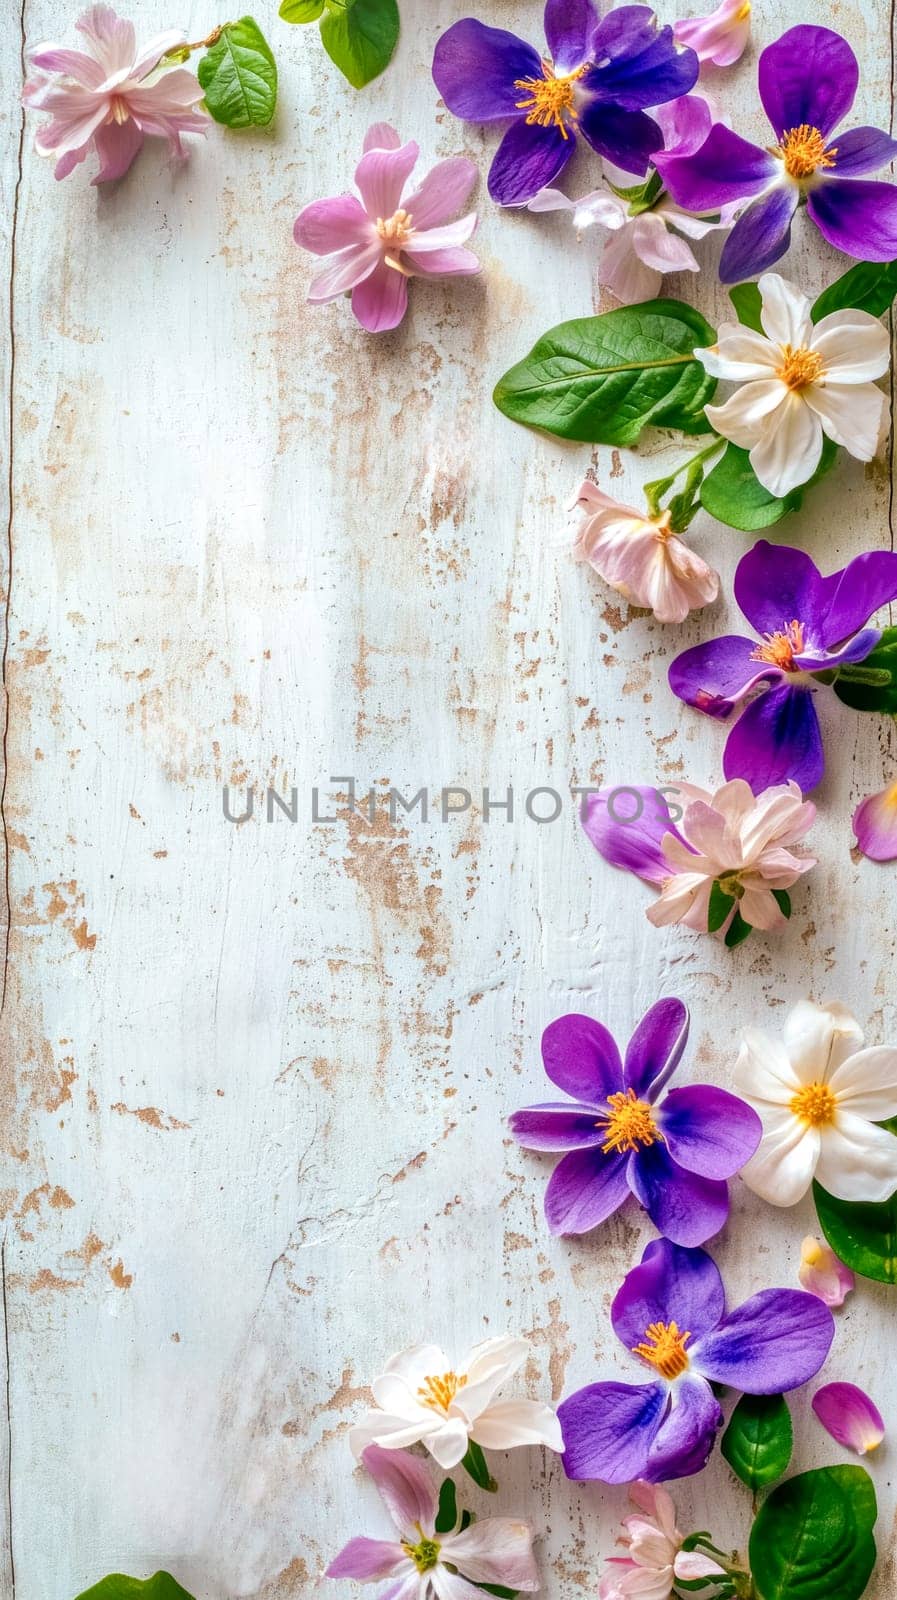 Fresh spring flowers, including delicate purple and white blossoms, are artistically arranged on a rustic, white-painted wooden background, creating a serene and natural composition. by Edophoto